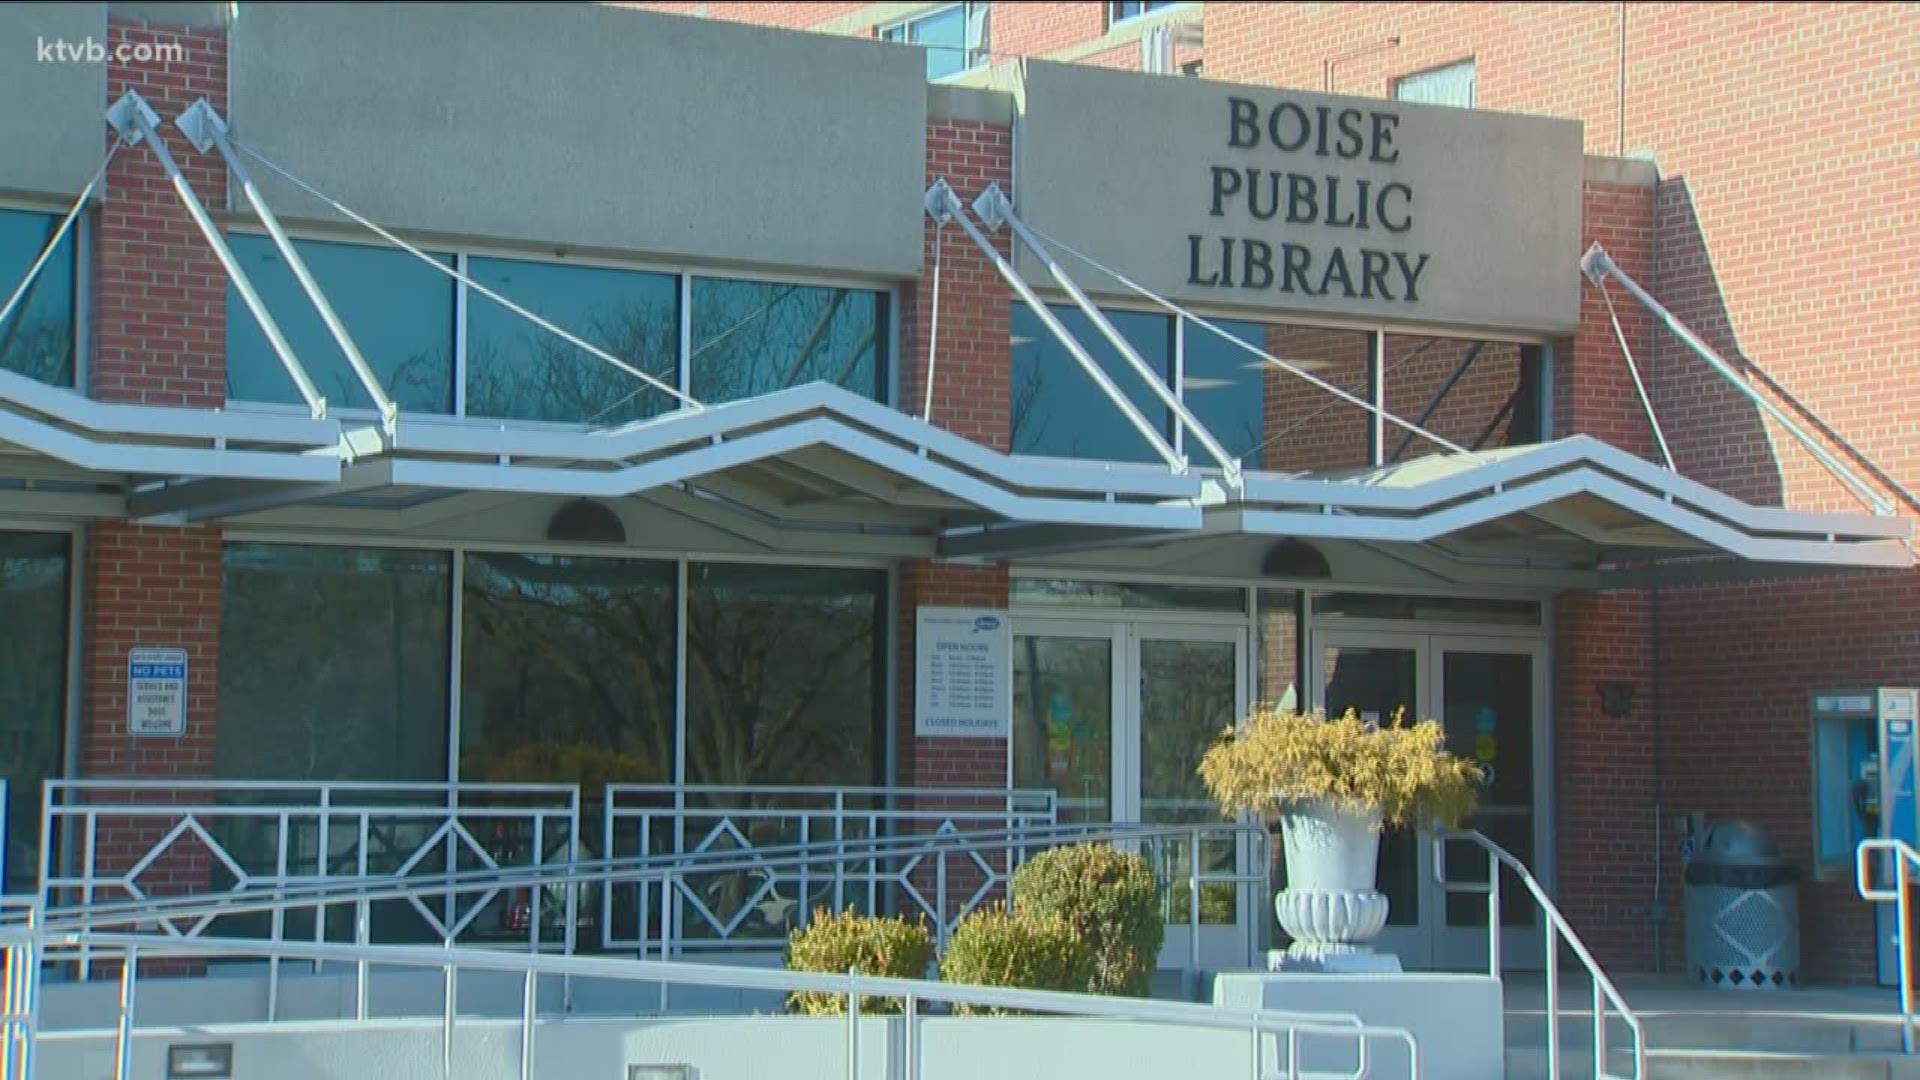 The Boise City Council met with the Boise Public Library Board of Trustees to discuss next steps for both a new library and maintaining the current one on Capitol.